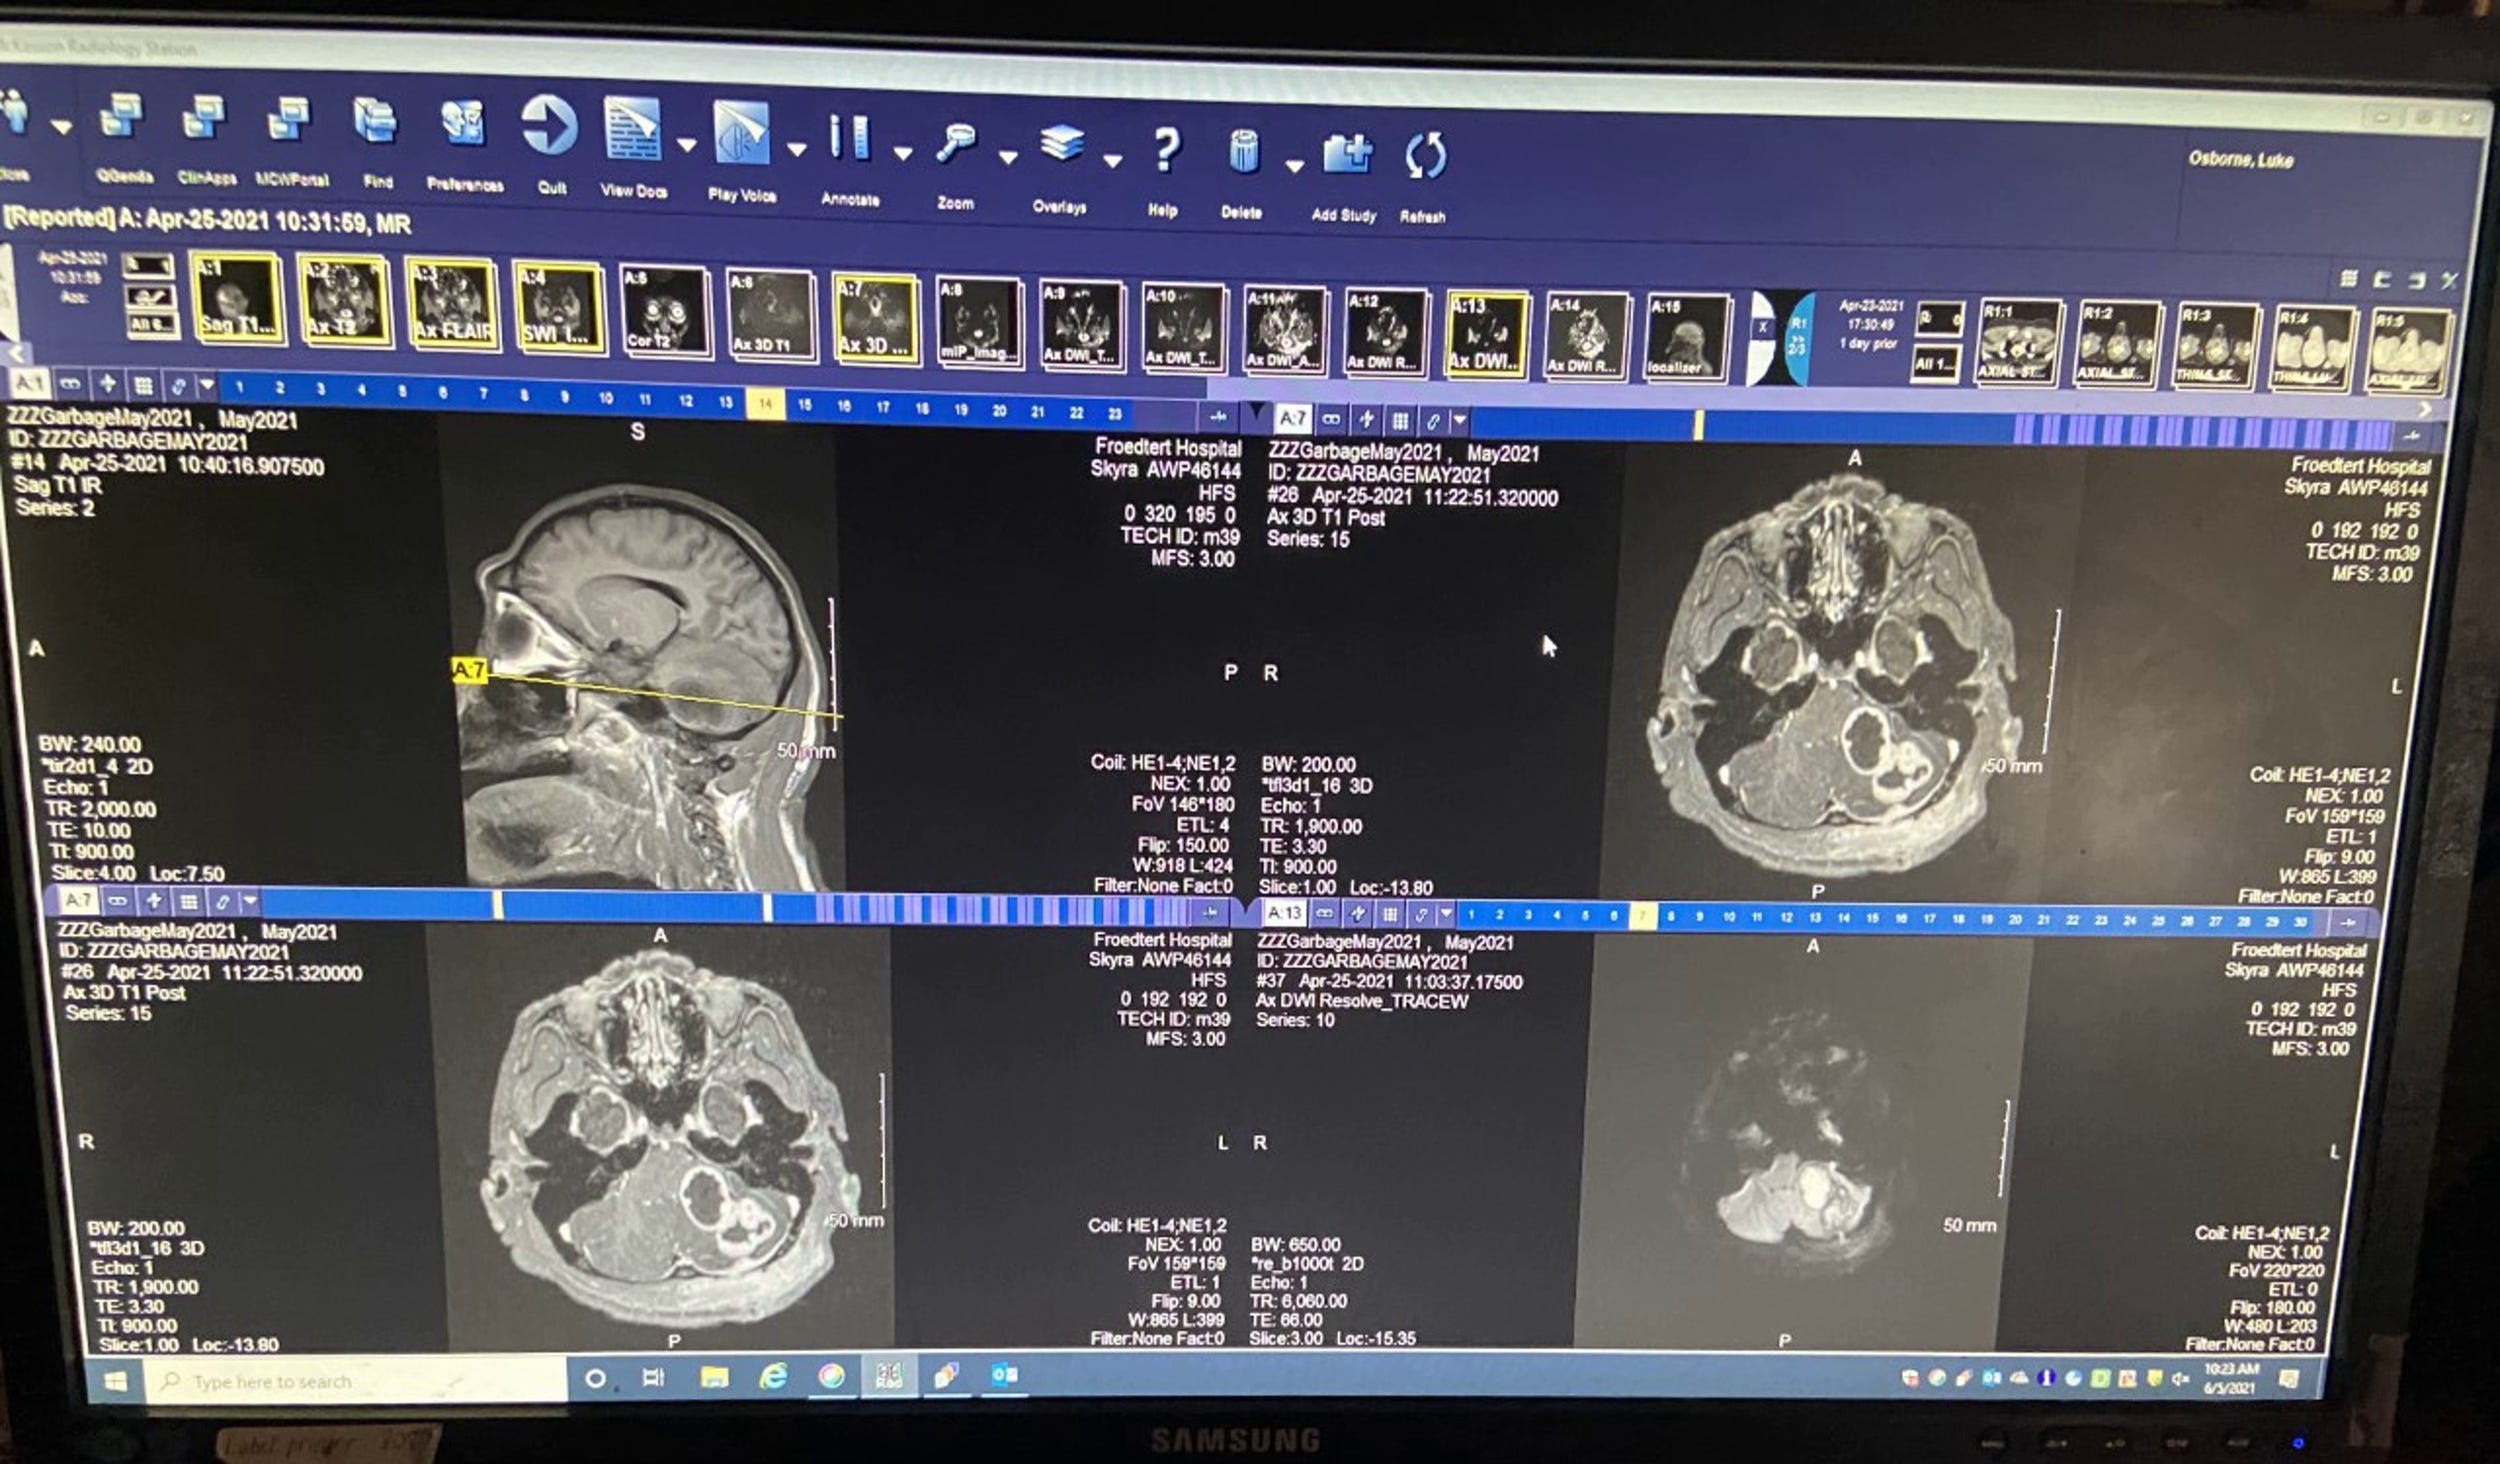 Scans of Qasai's brain reveal he is suffering from two brain abscesses.